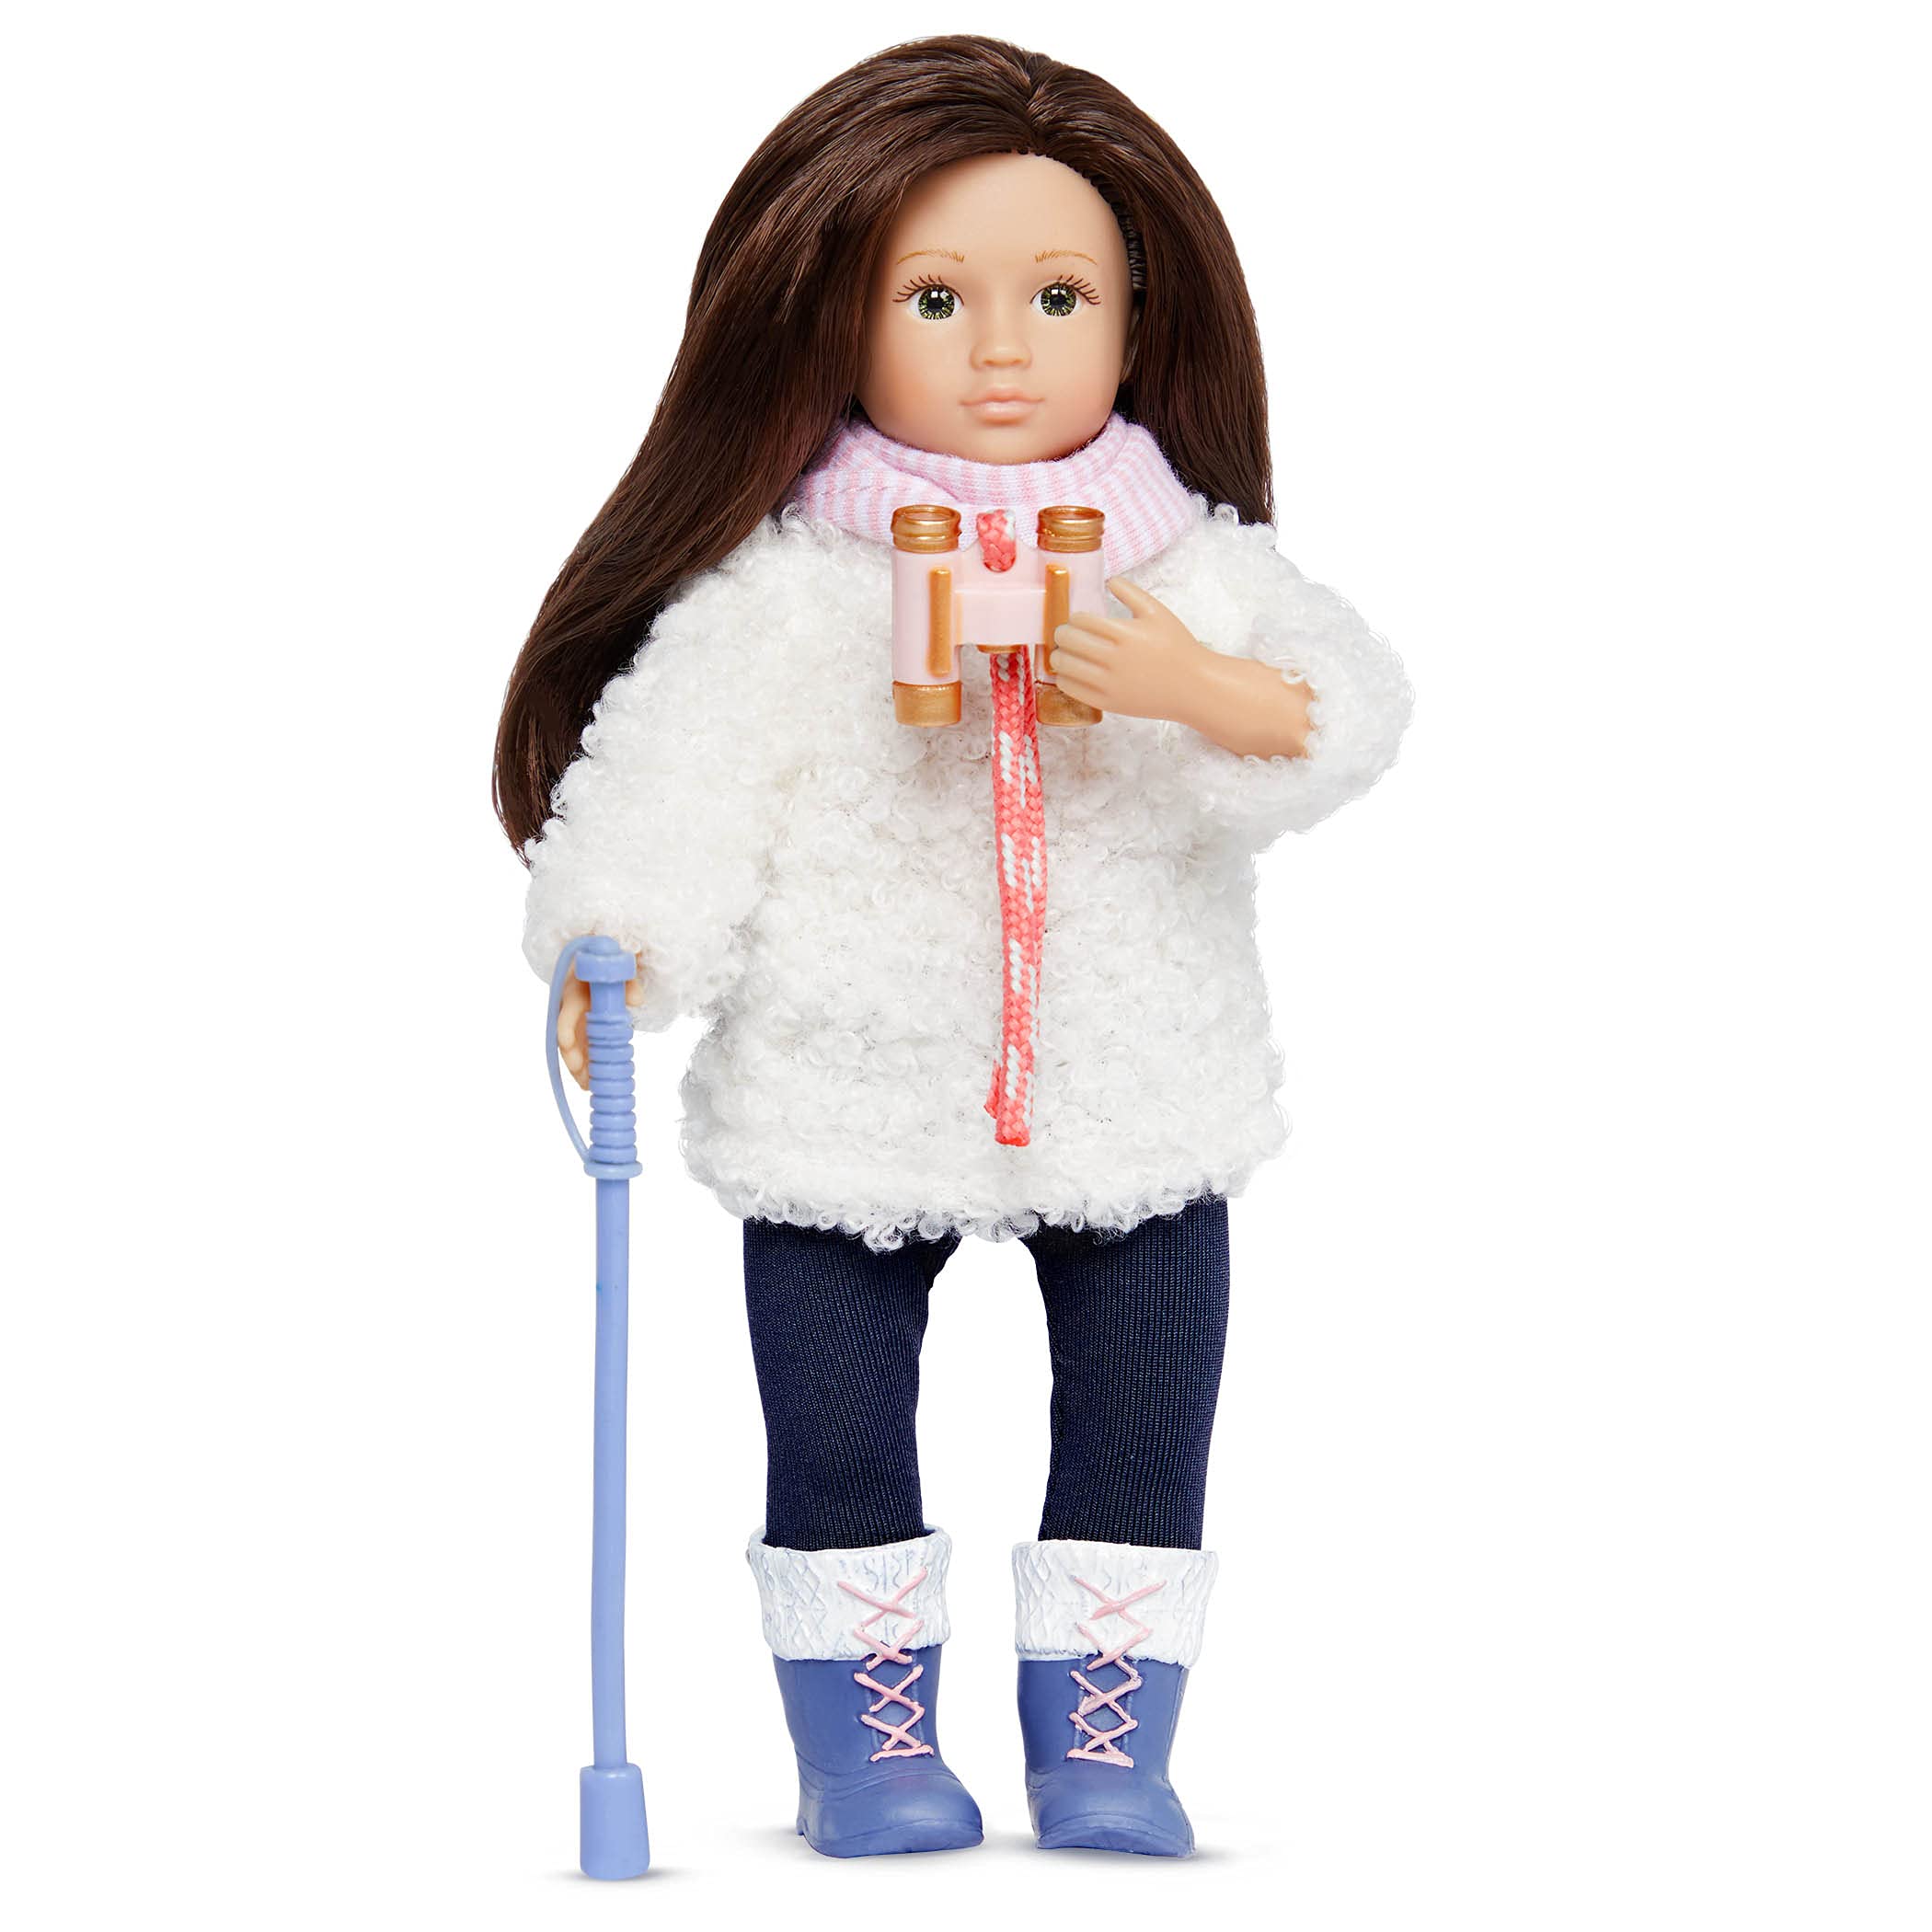 Lori Dolls – Farah’s Hiking Set – Mini Doll & Hiking Accessories – Clothes & Accessories for 6-inch Dolls – Boots, Flashlight, Map & More – Toys for Kids – 3 Years +